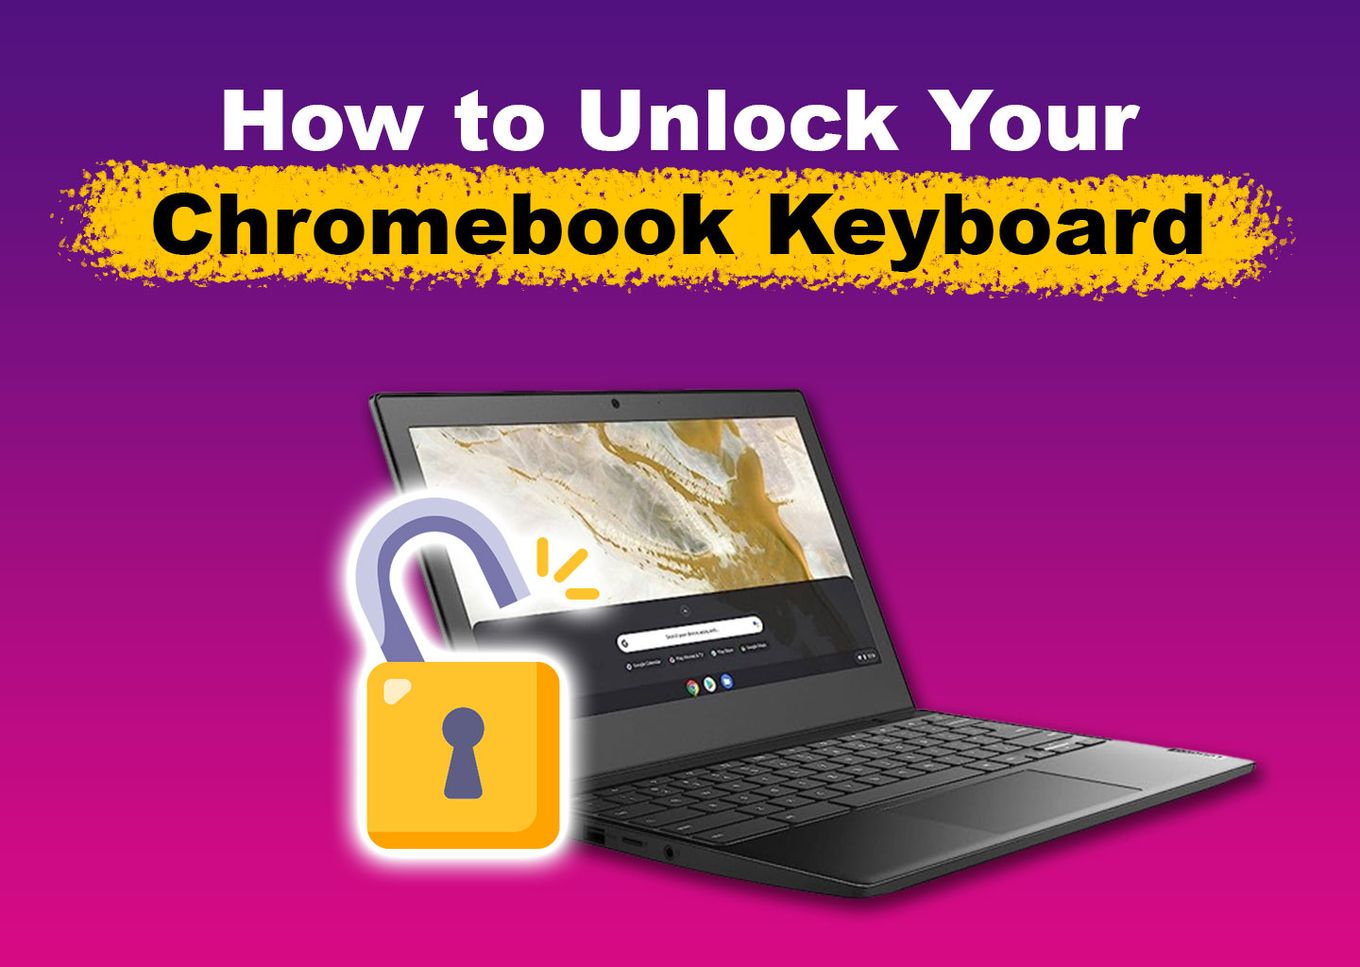 How to Unlock Your Chromebook Keyboard